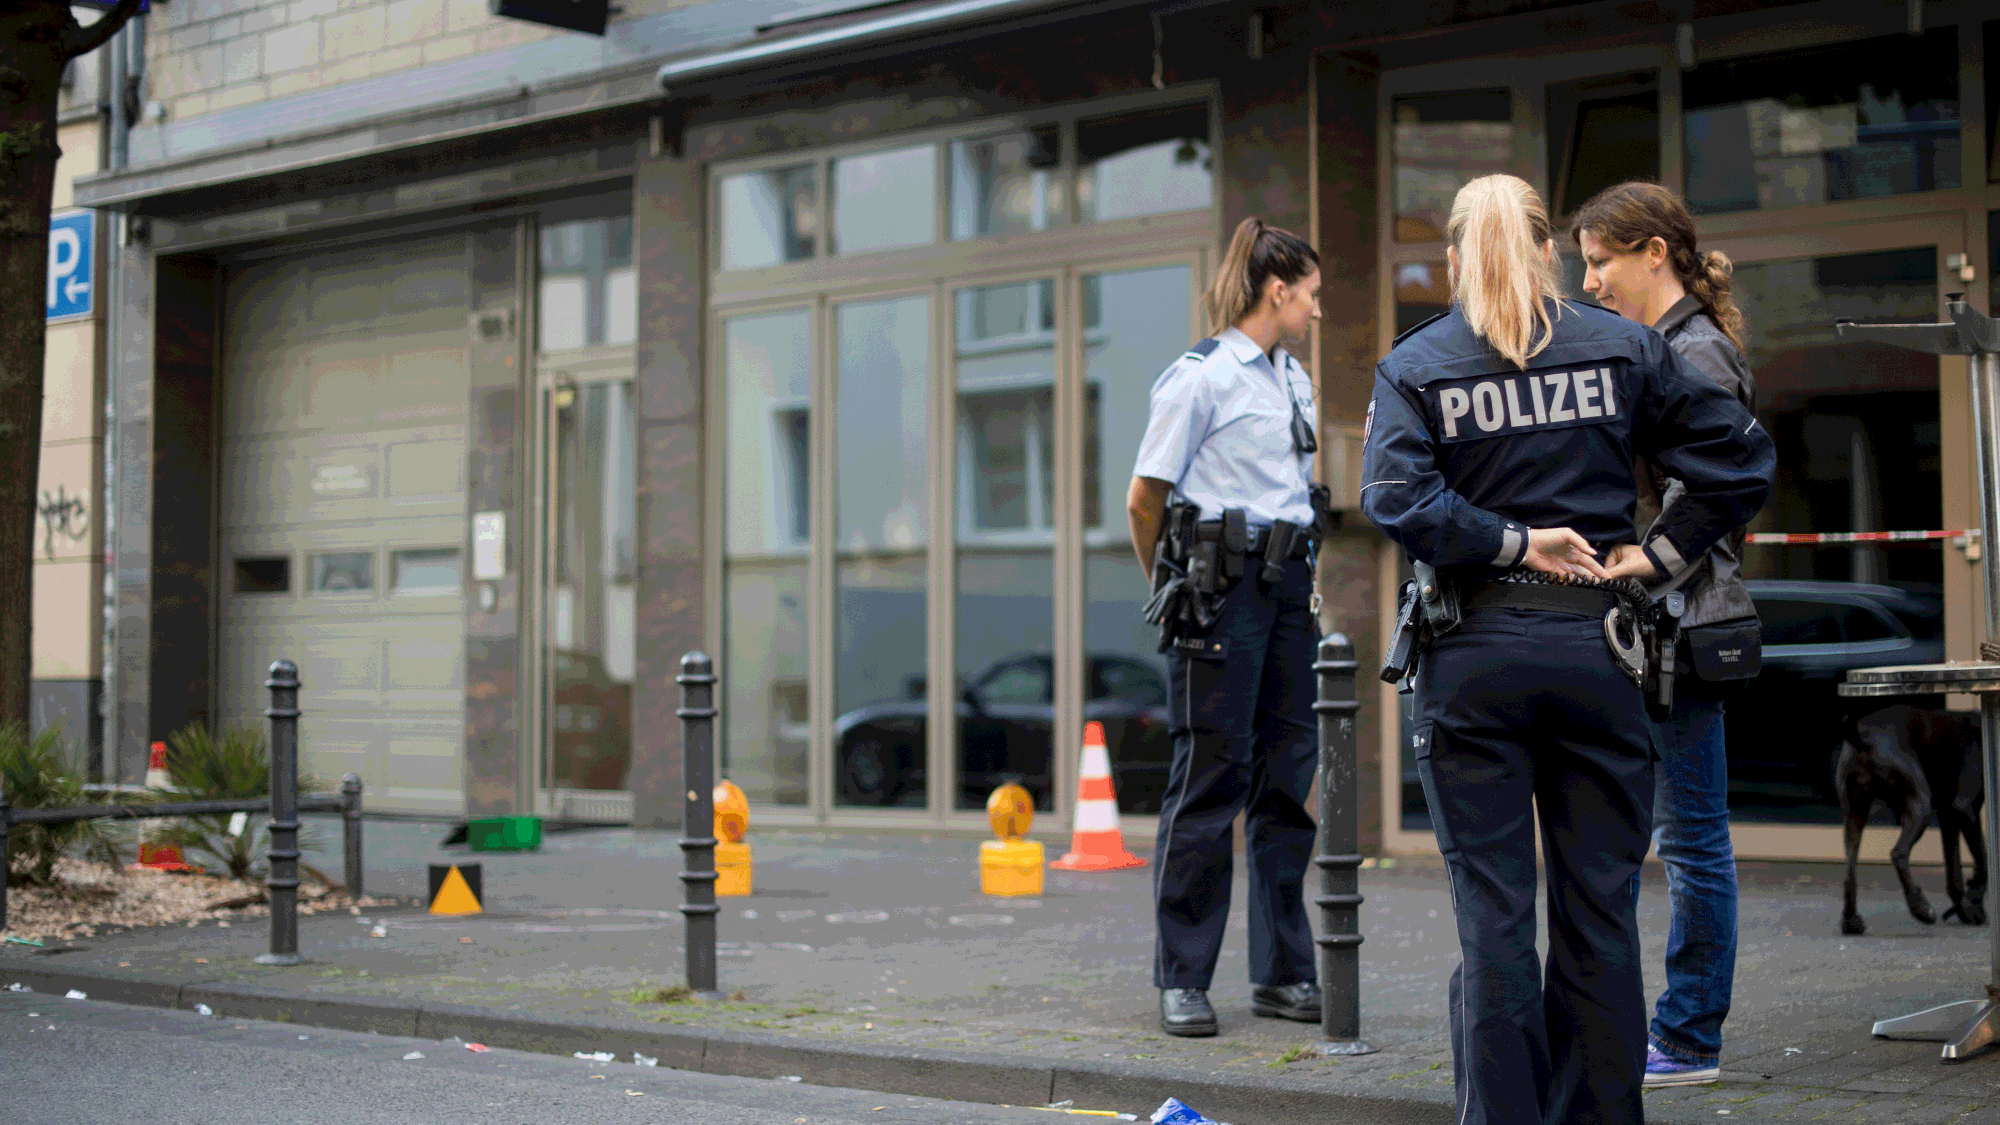 Policewomen at the site of the attack in Cologne, Germany. (Photo: AP)